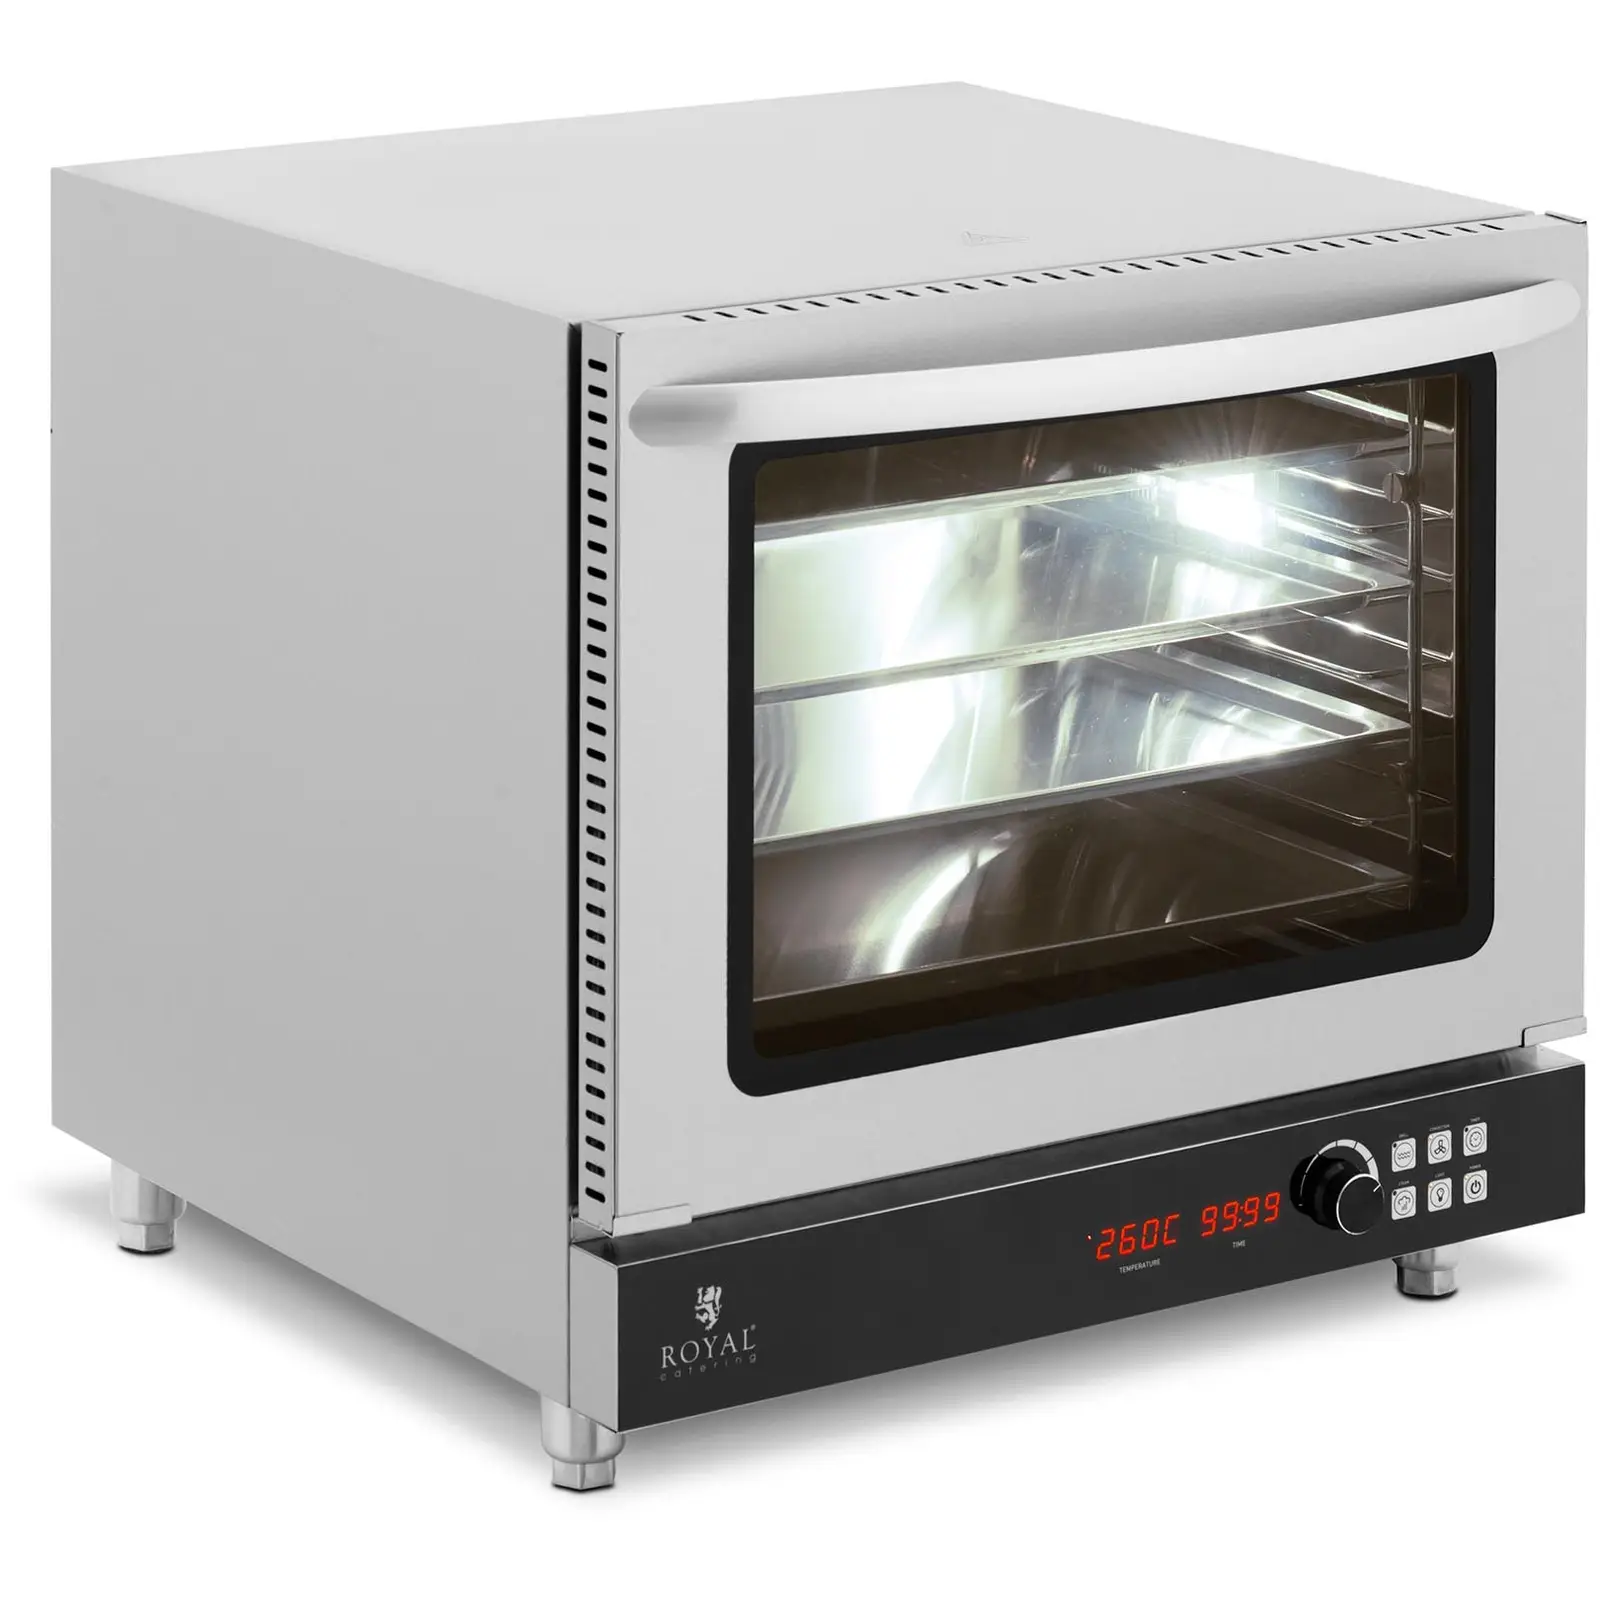 Hot air oven - 2800 W - Timer - 3 functions - 4 Trays - 0